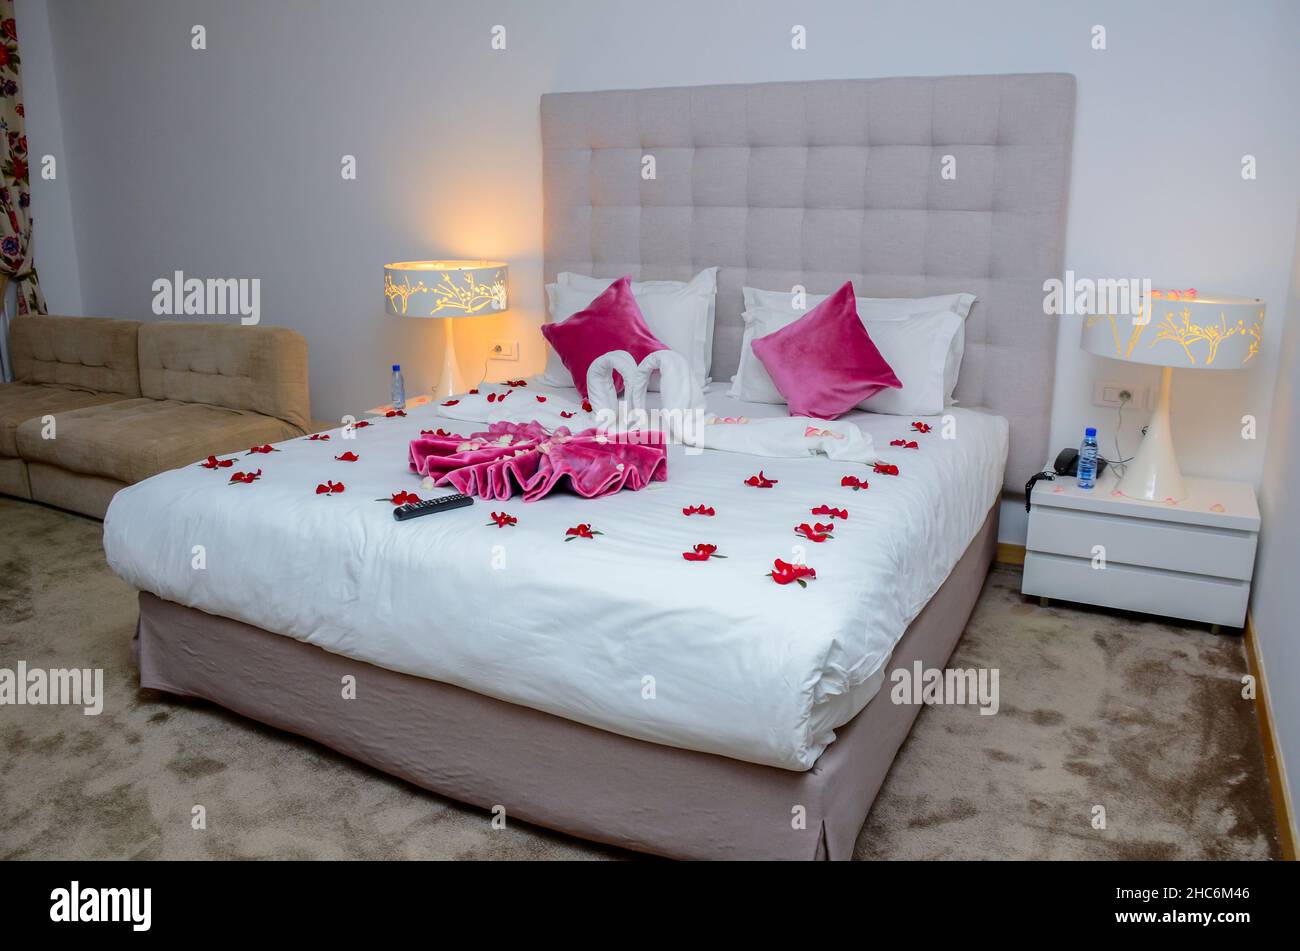 Swan towel decorations and heart shaped rose petals on bed in honeymoon suite hotel room bed Stock Photo